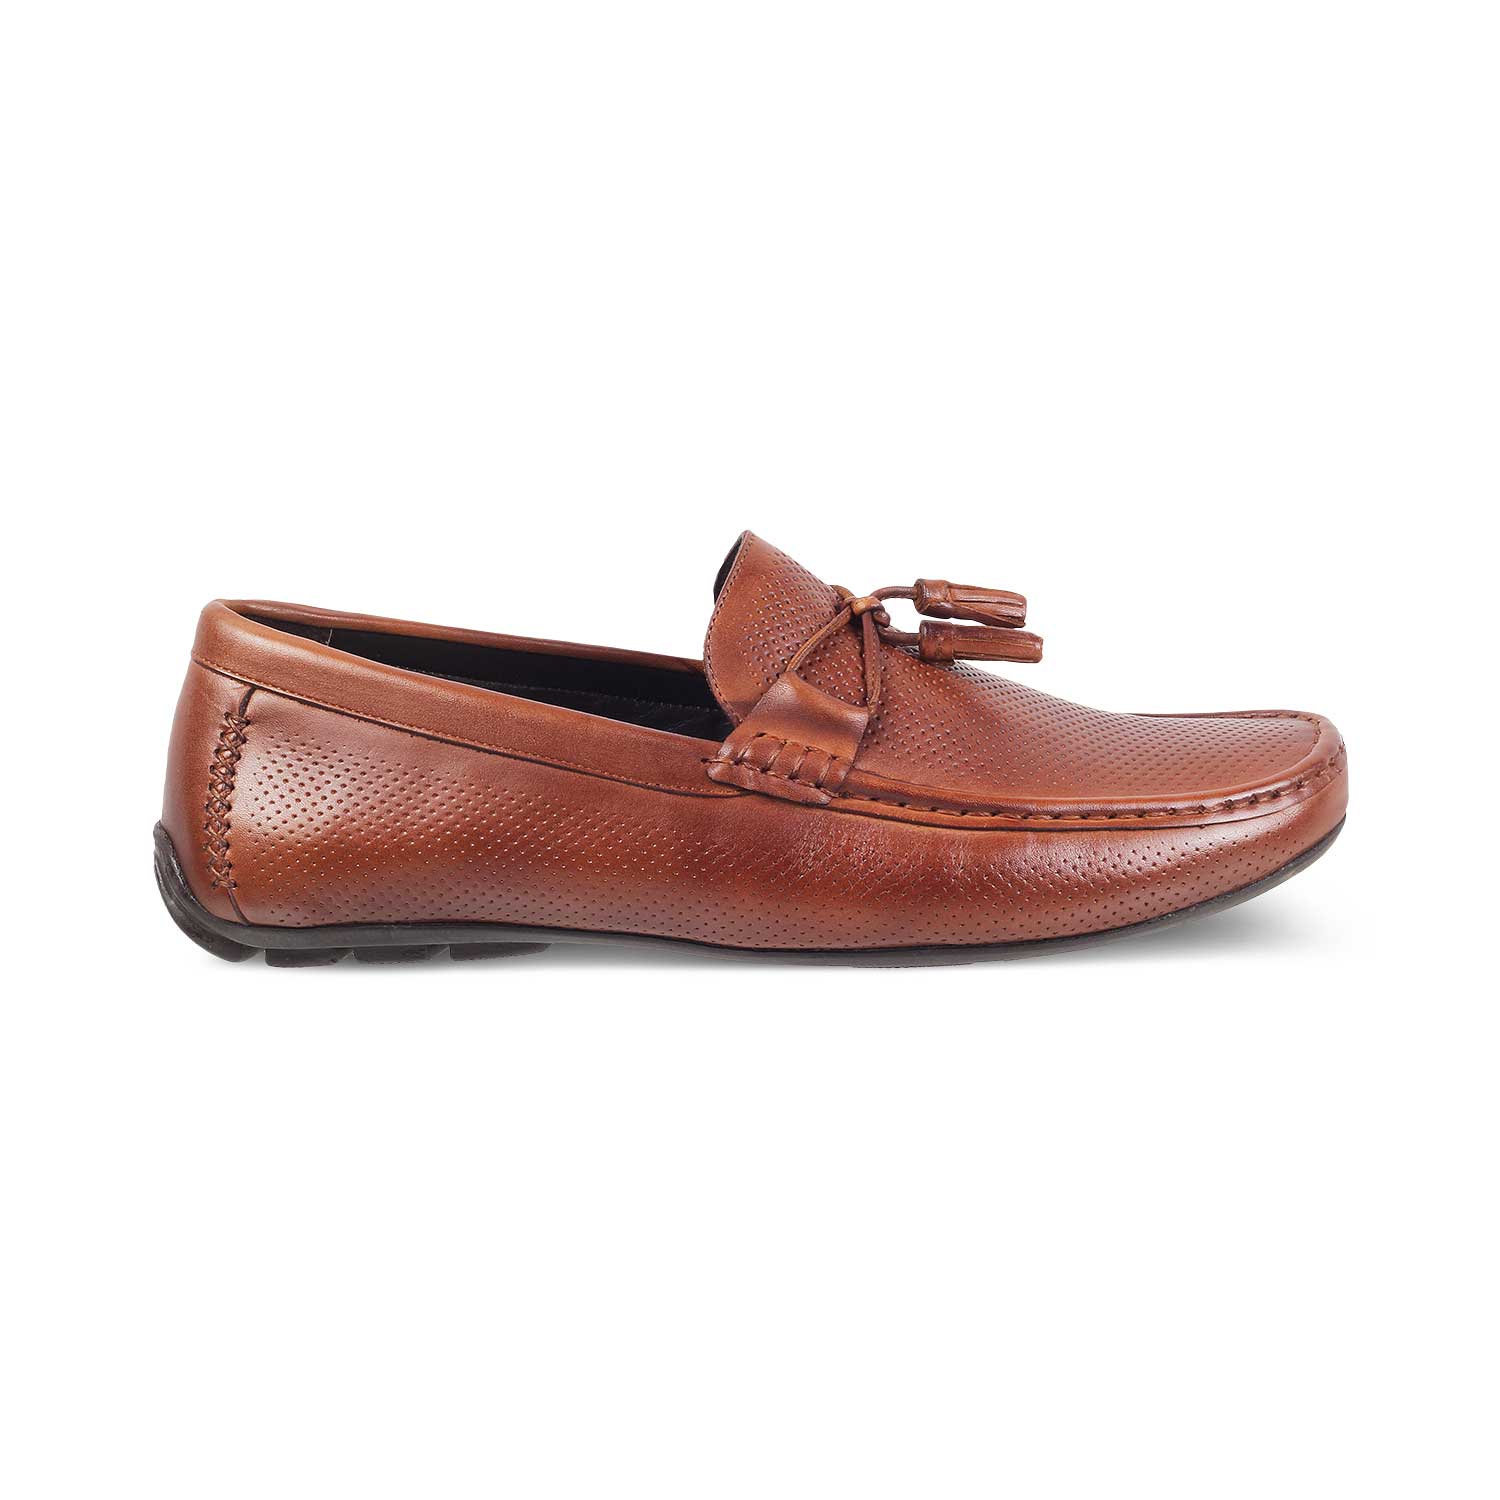 Otie Brown Men's Leather Loafers Online at Tresmode.com